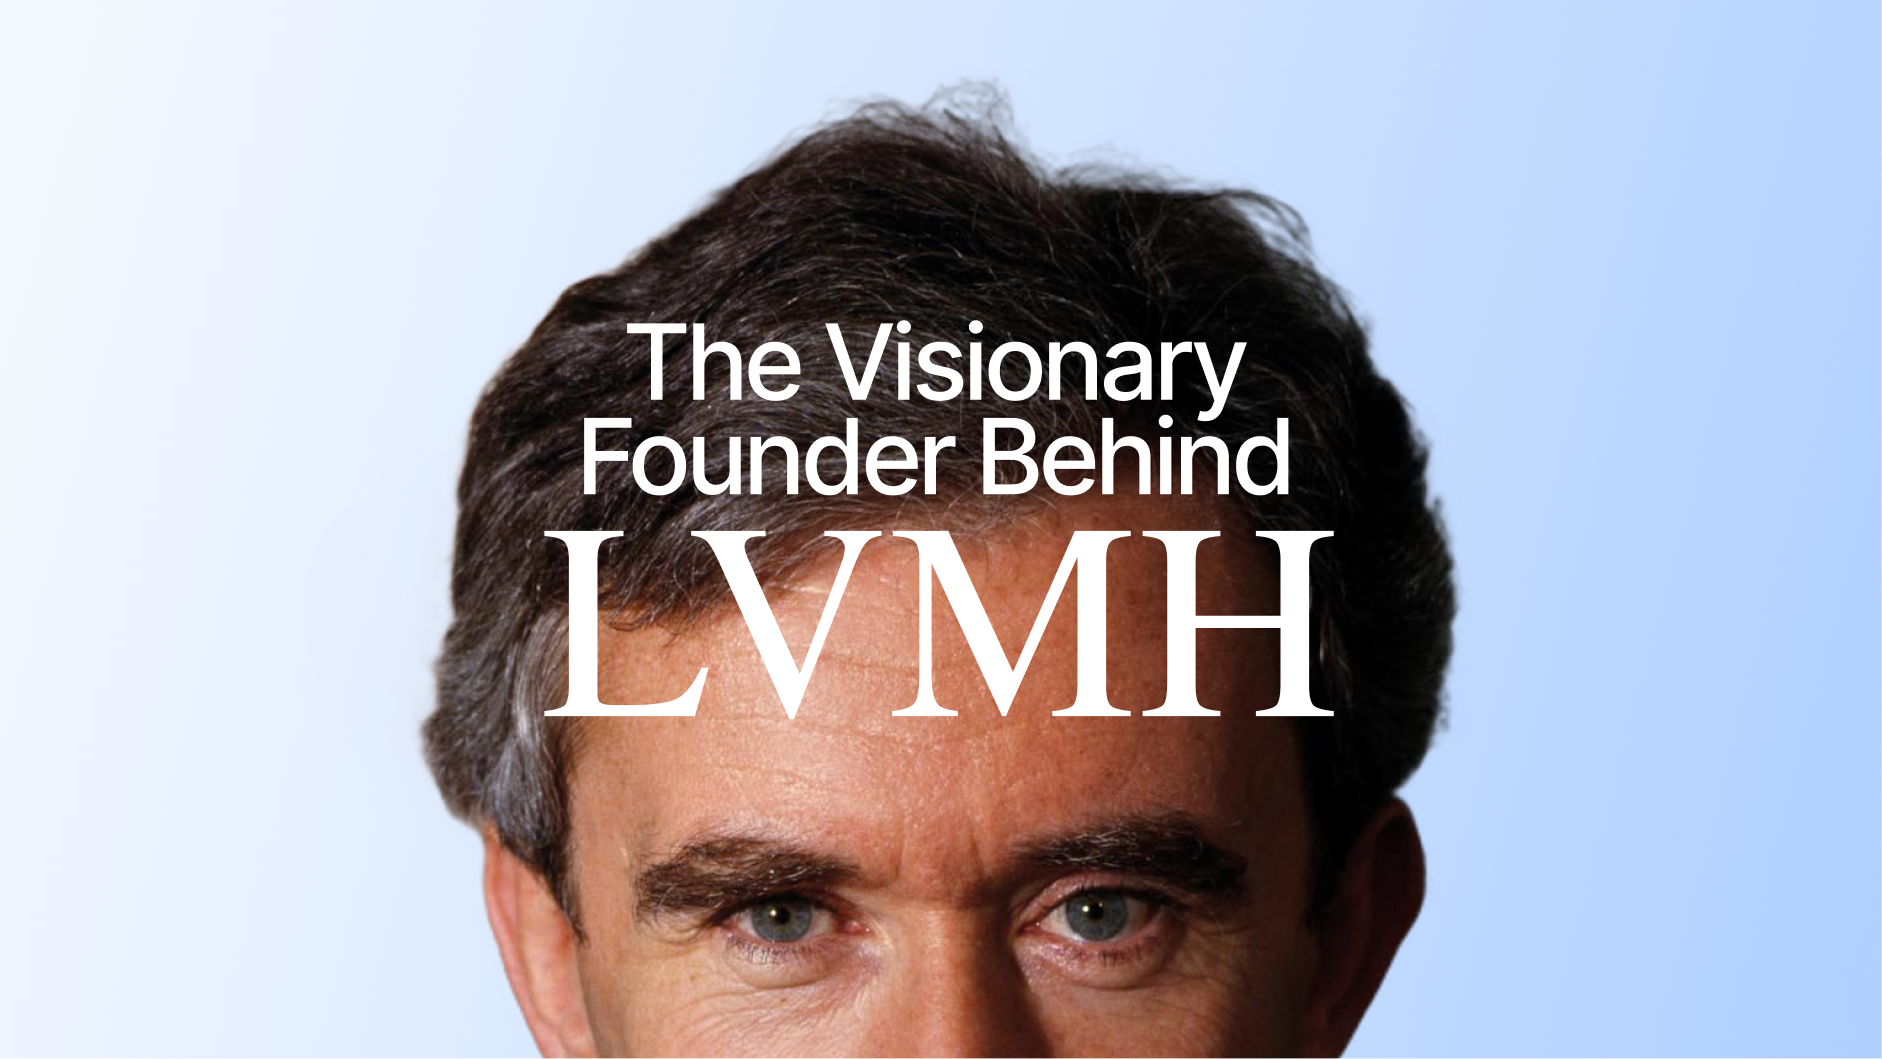 LVMH Q3 Results: Company Warms to Online Sales As Prospects